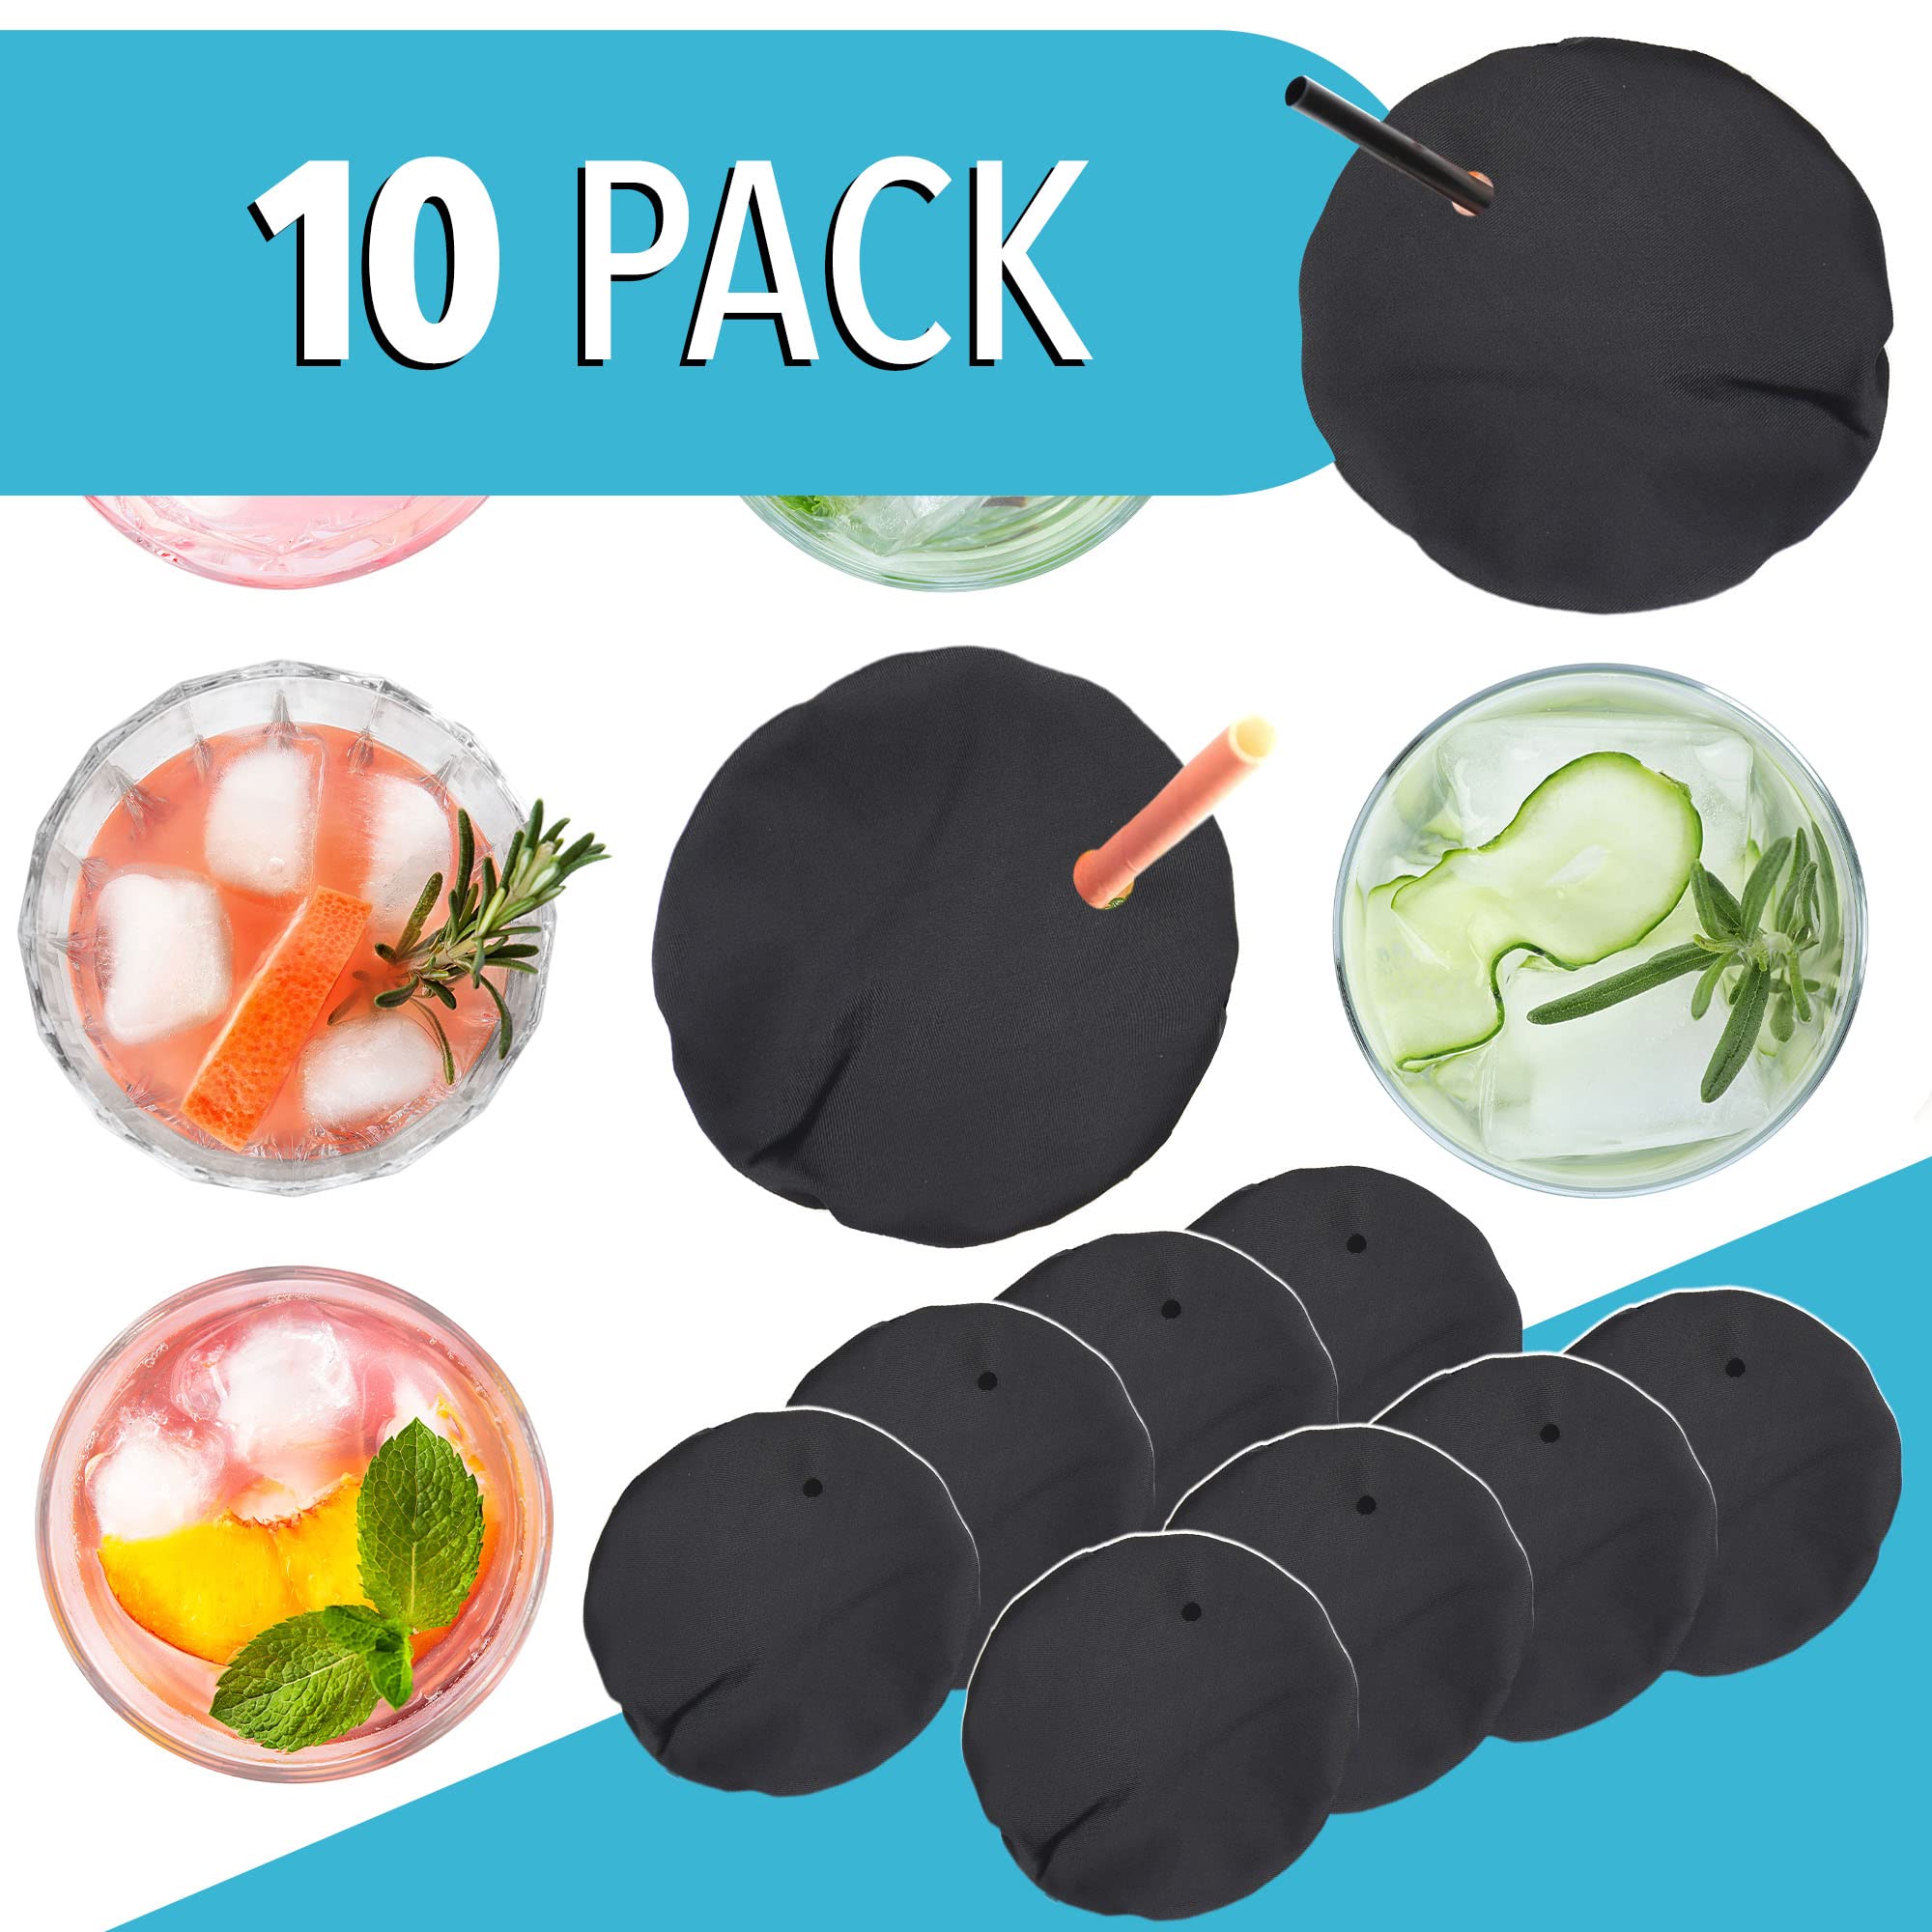 [10-Pack] Drink Covers for Alcohol Protection - Fabric Drink Protector for Men & Women - Wine Glass Covers to Prevent Your Drink Getting Spiked - Black Cup Covers For Drinks - Drink Covers for Glasses